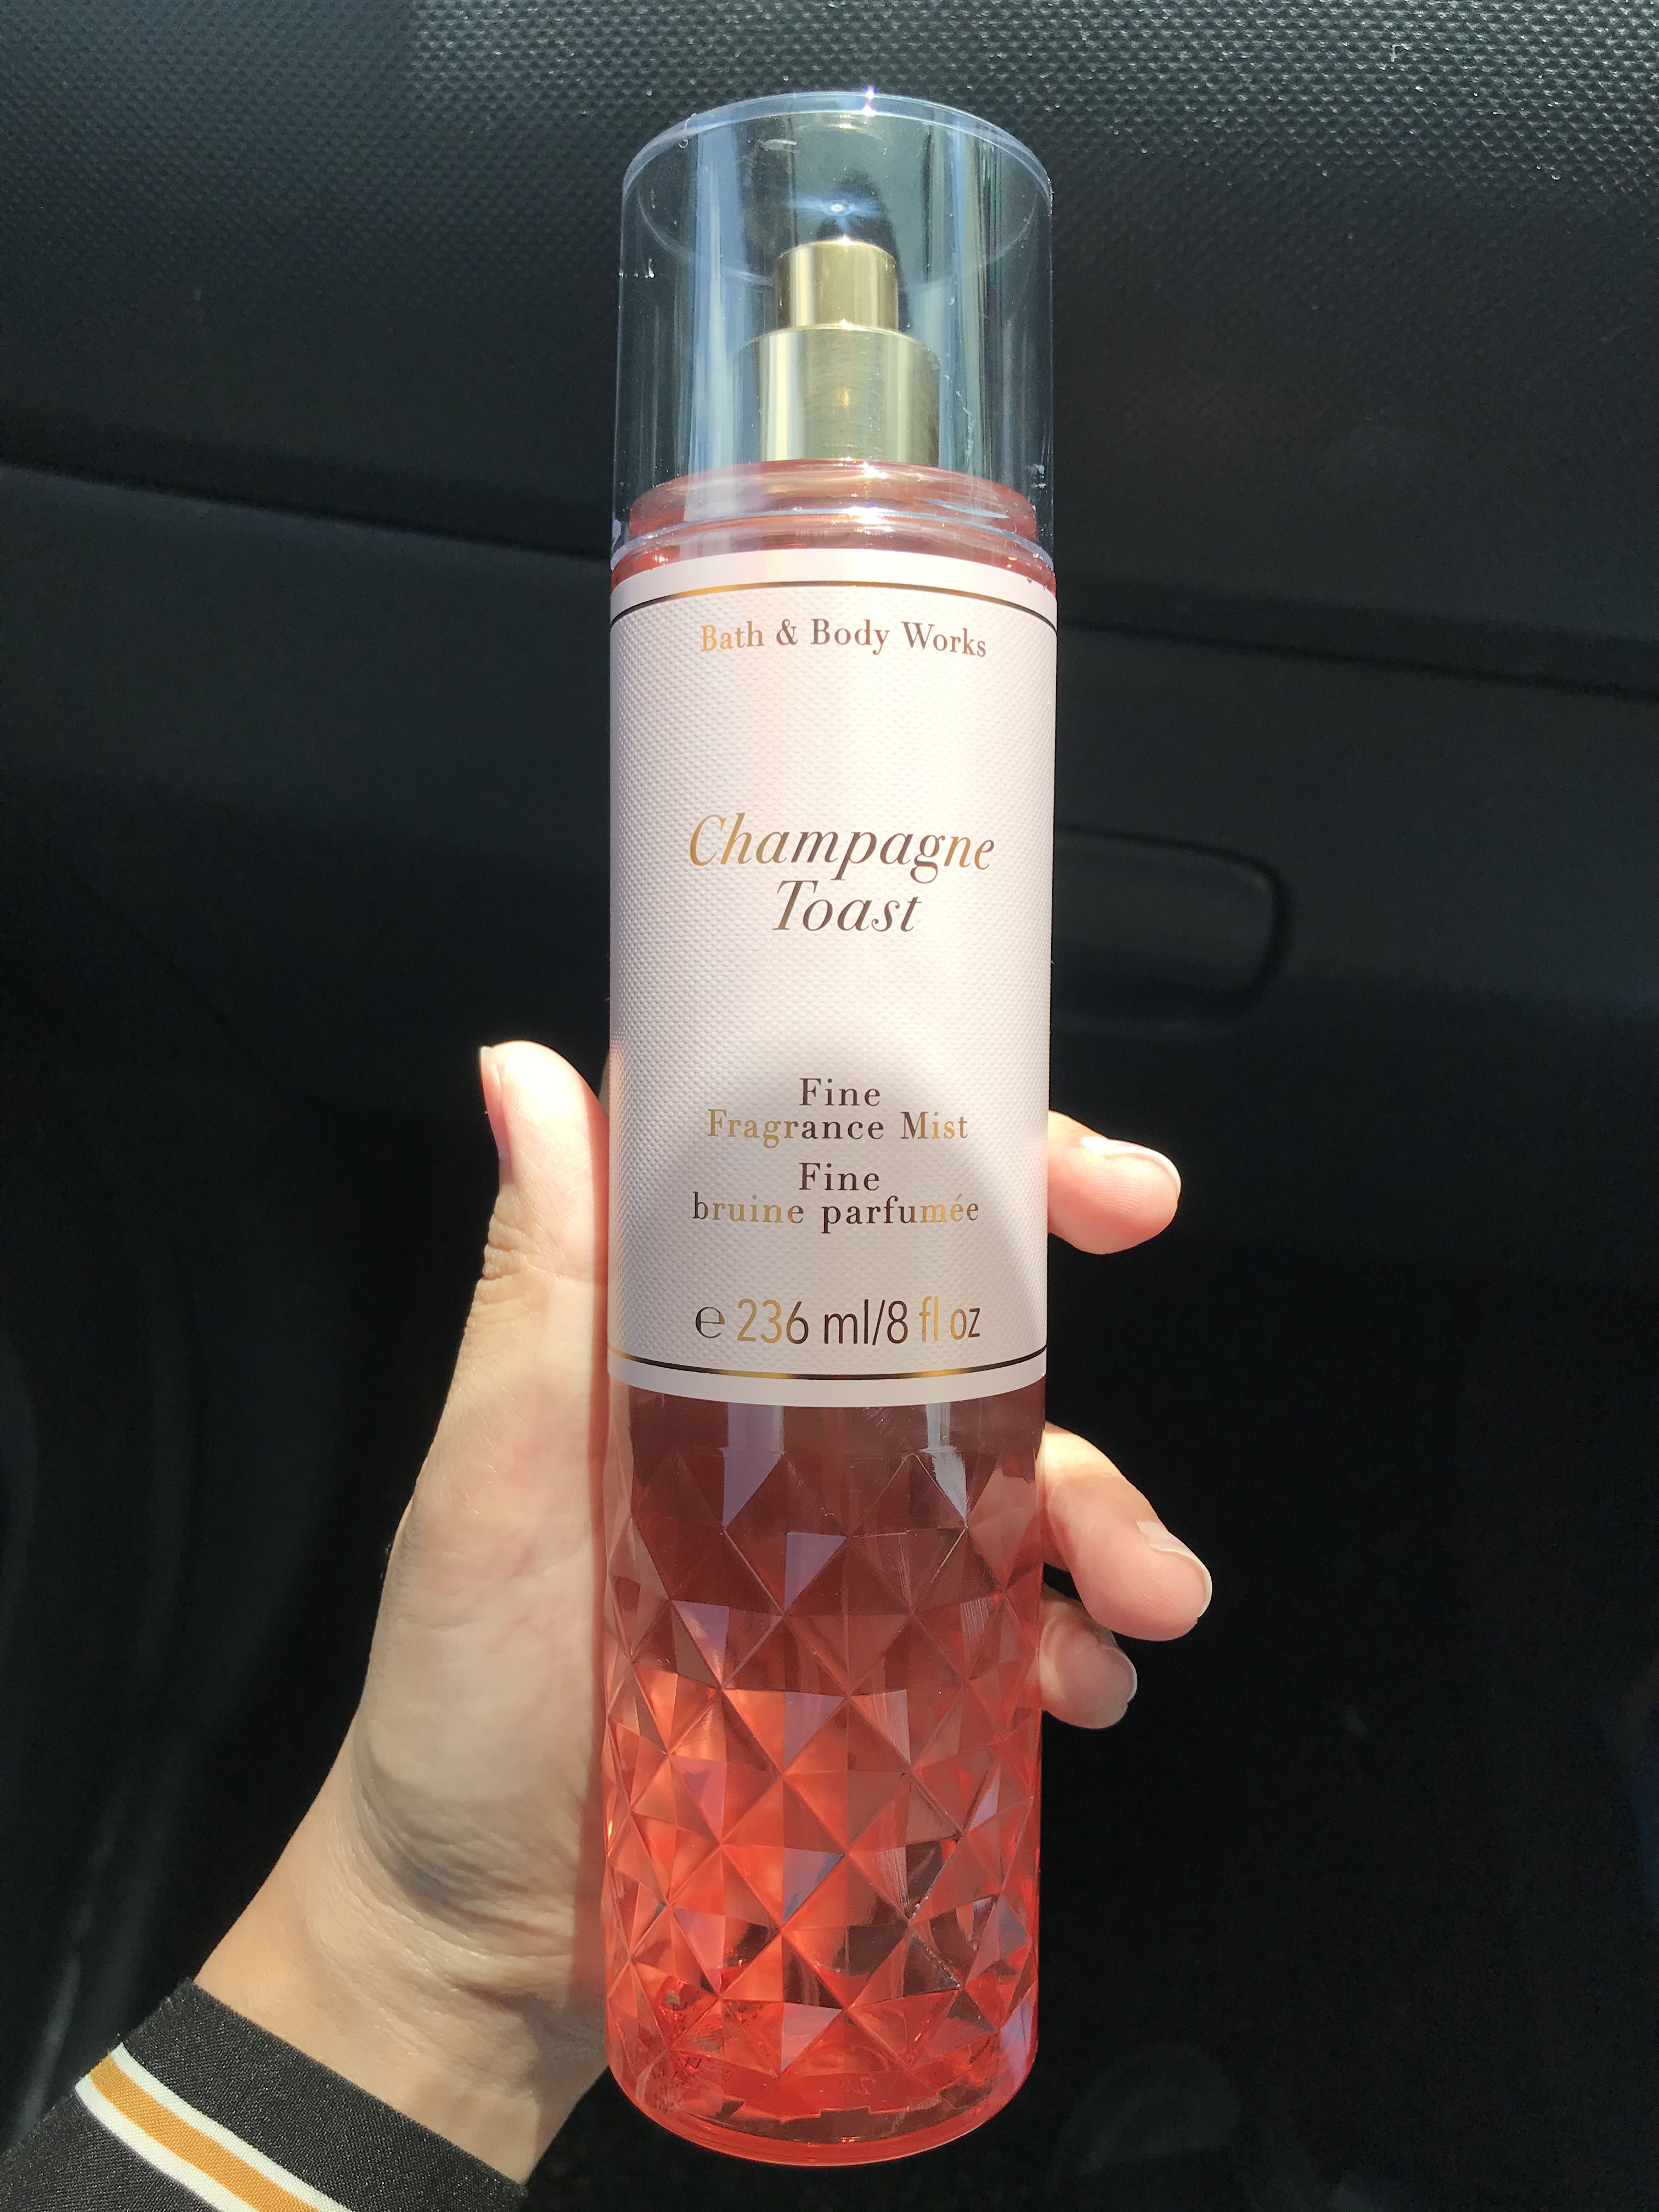 Body and toast works bath champagne Champagne Toast